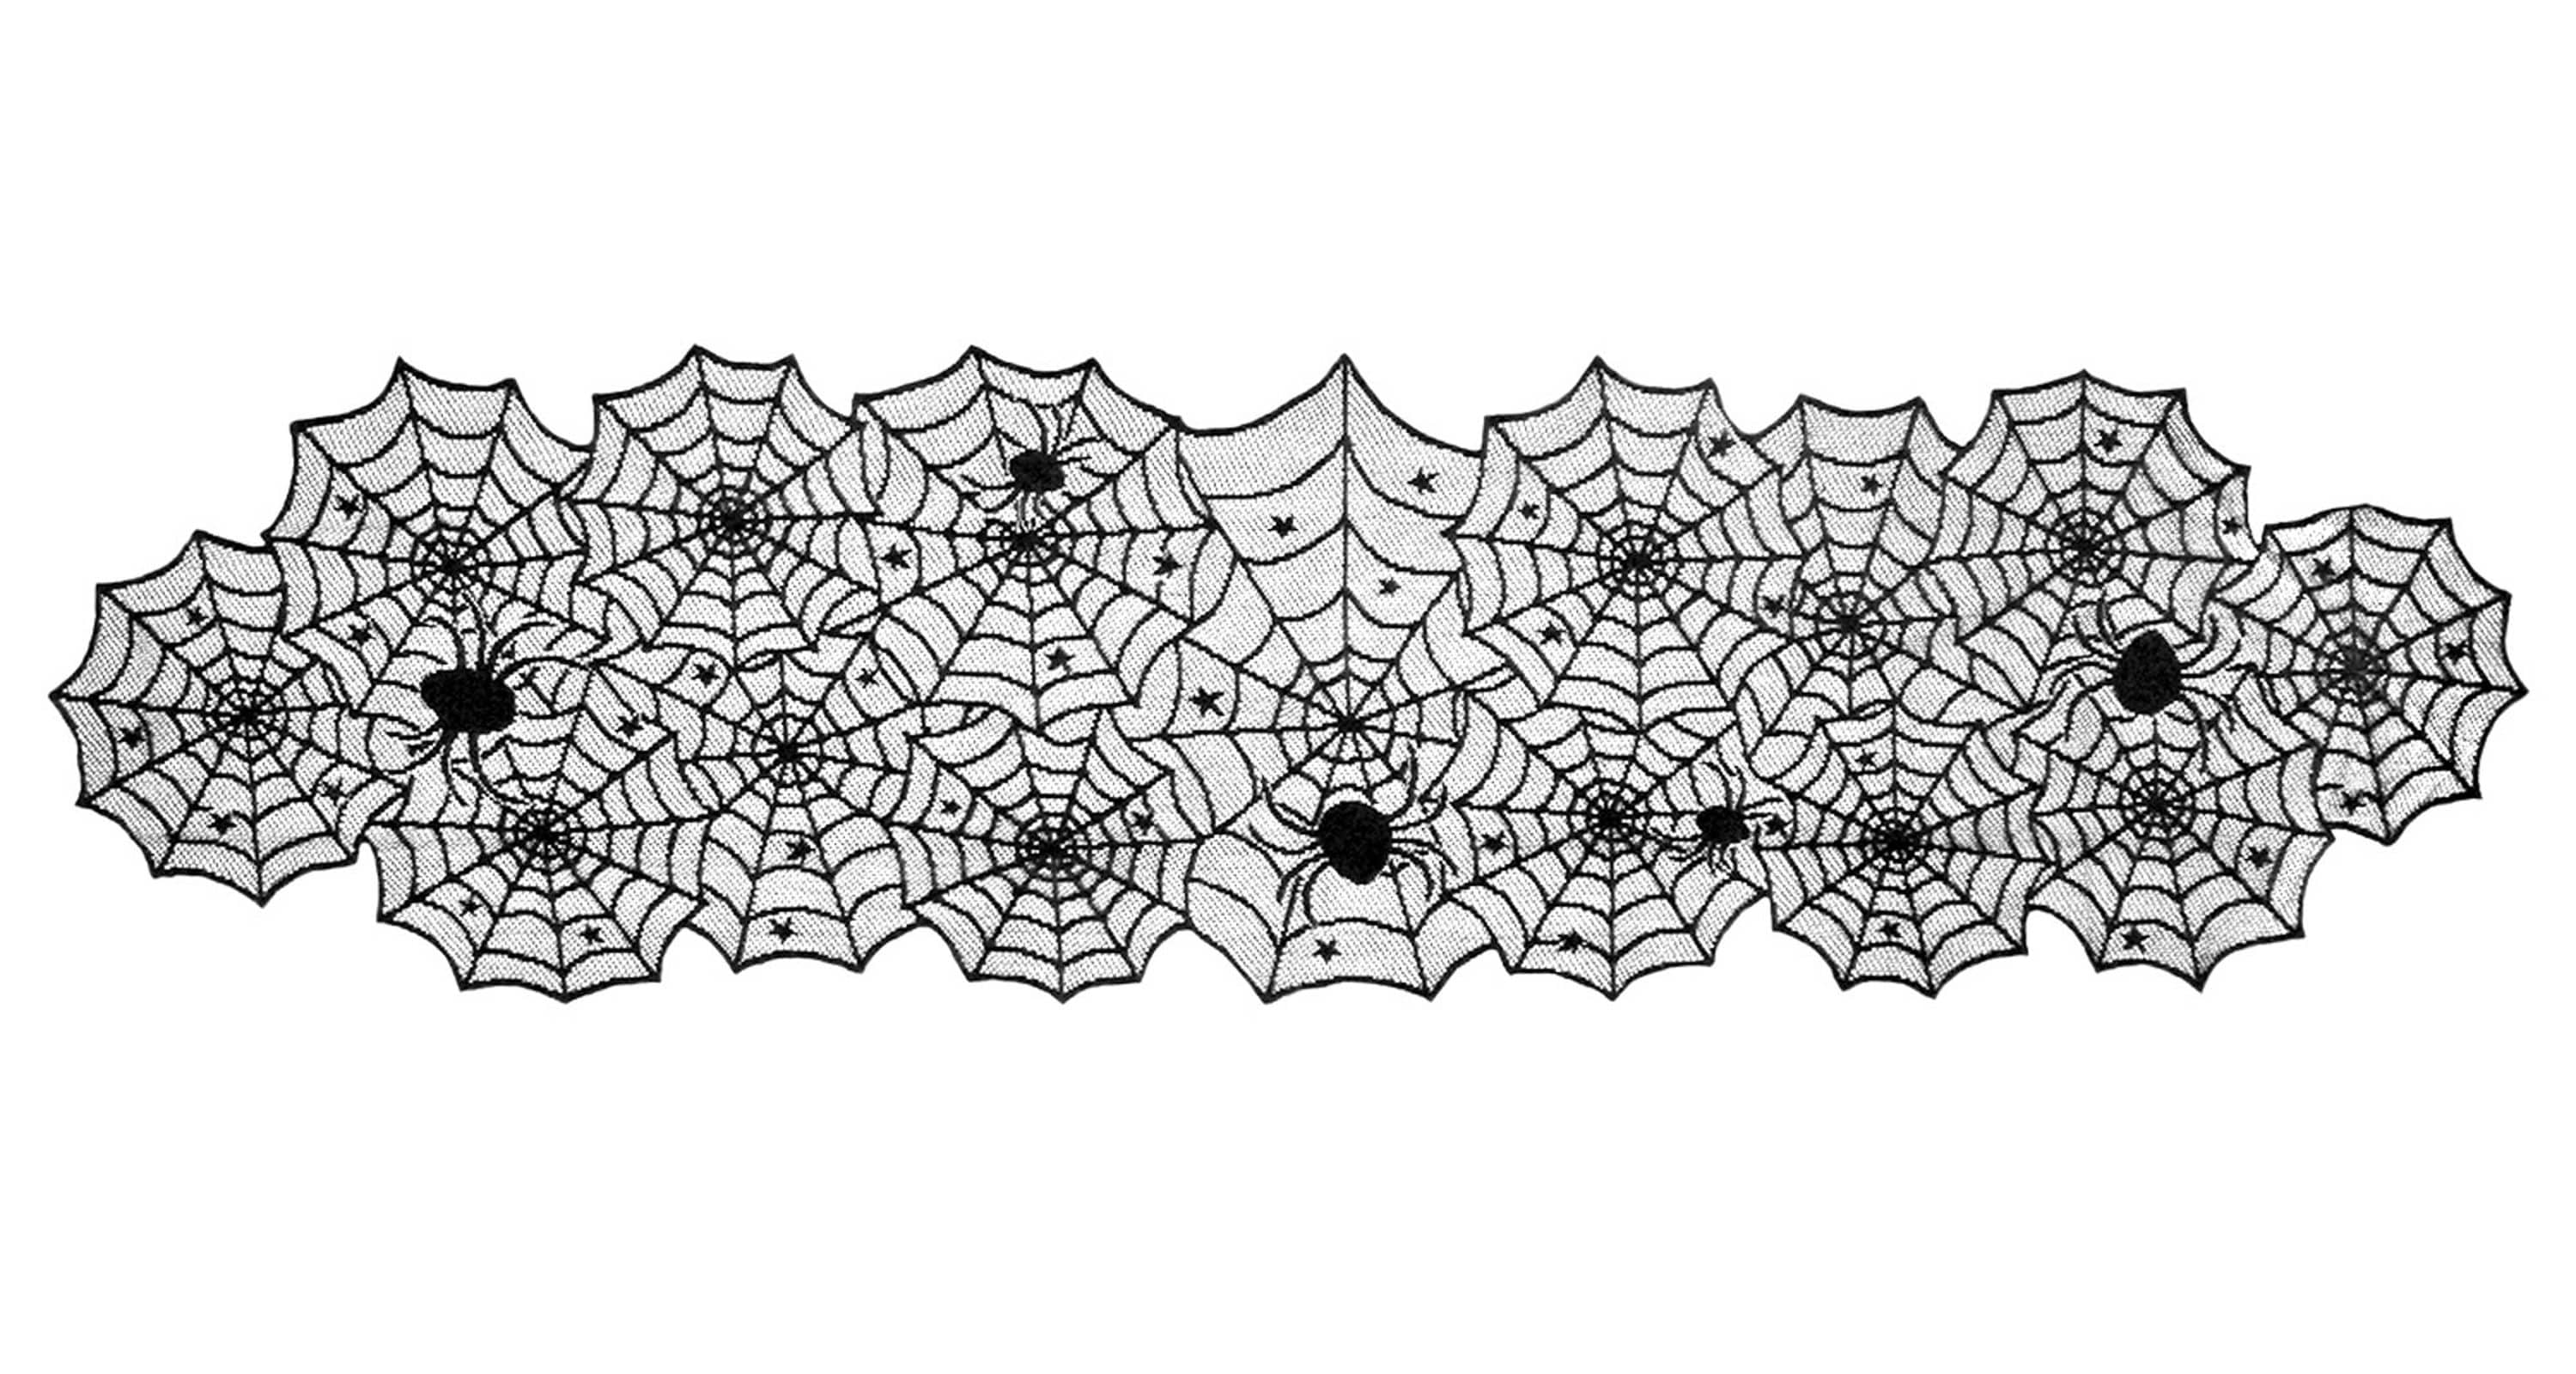 Aflyko Halloween Table Runner Ghost Orange Spider Web Fun Spooky Party Holiday Kitchen Dining Table Setting Winter Traditional Day of The Dead Home Decor 13 × 90